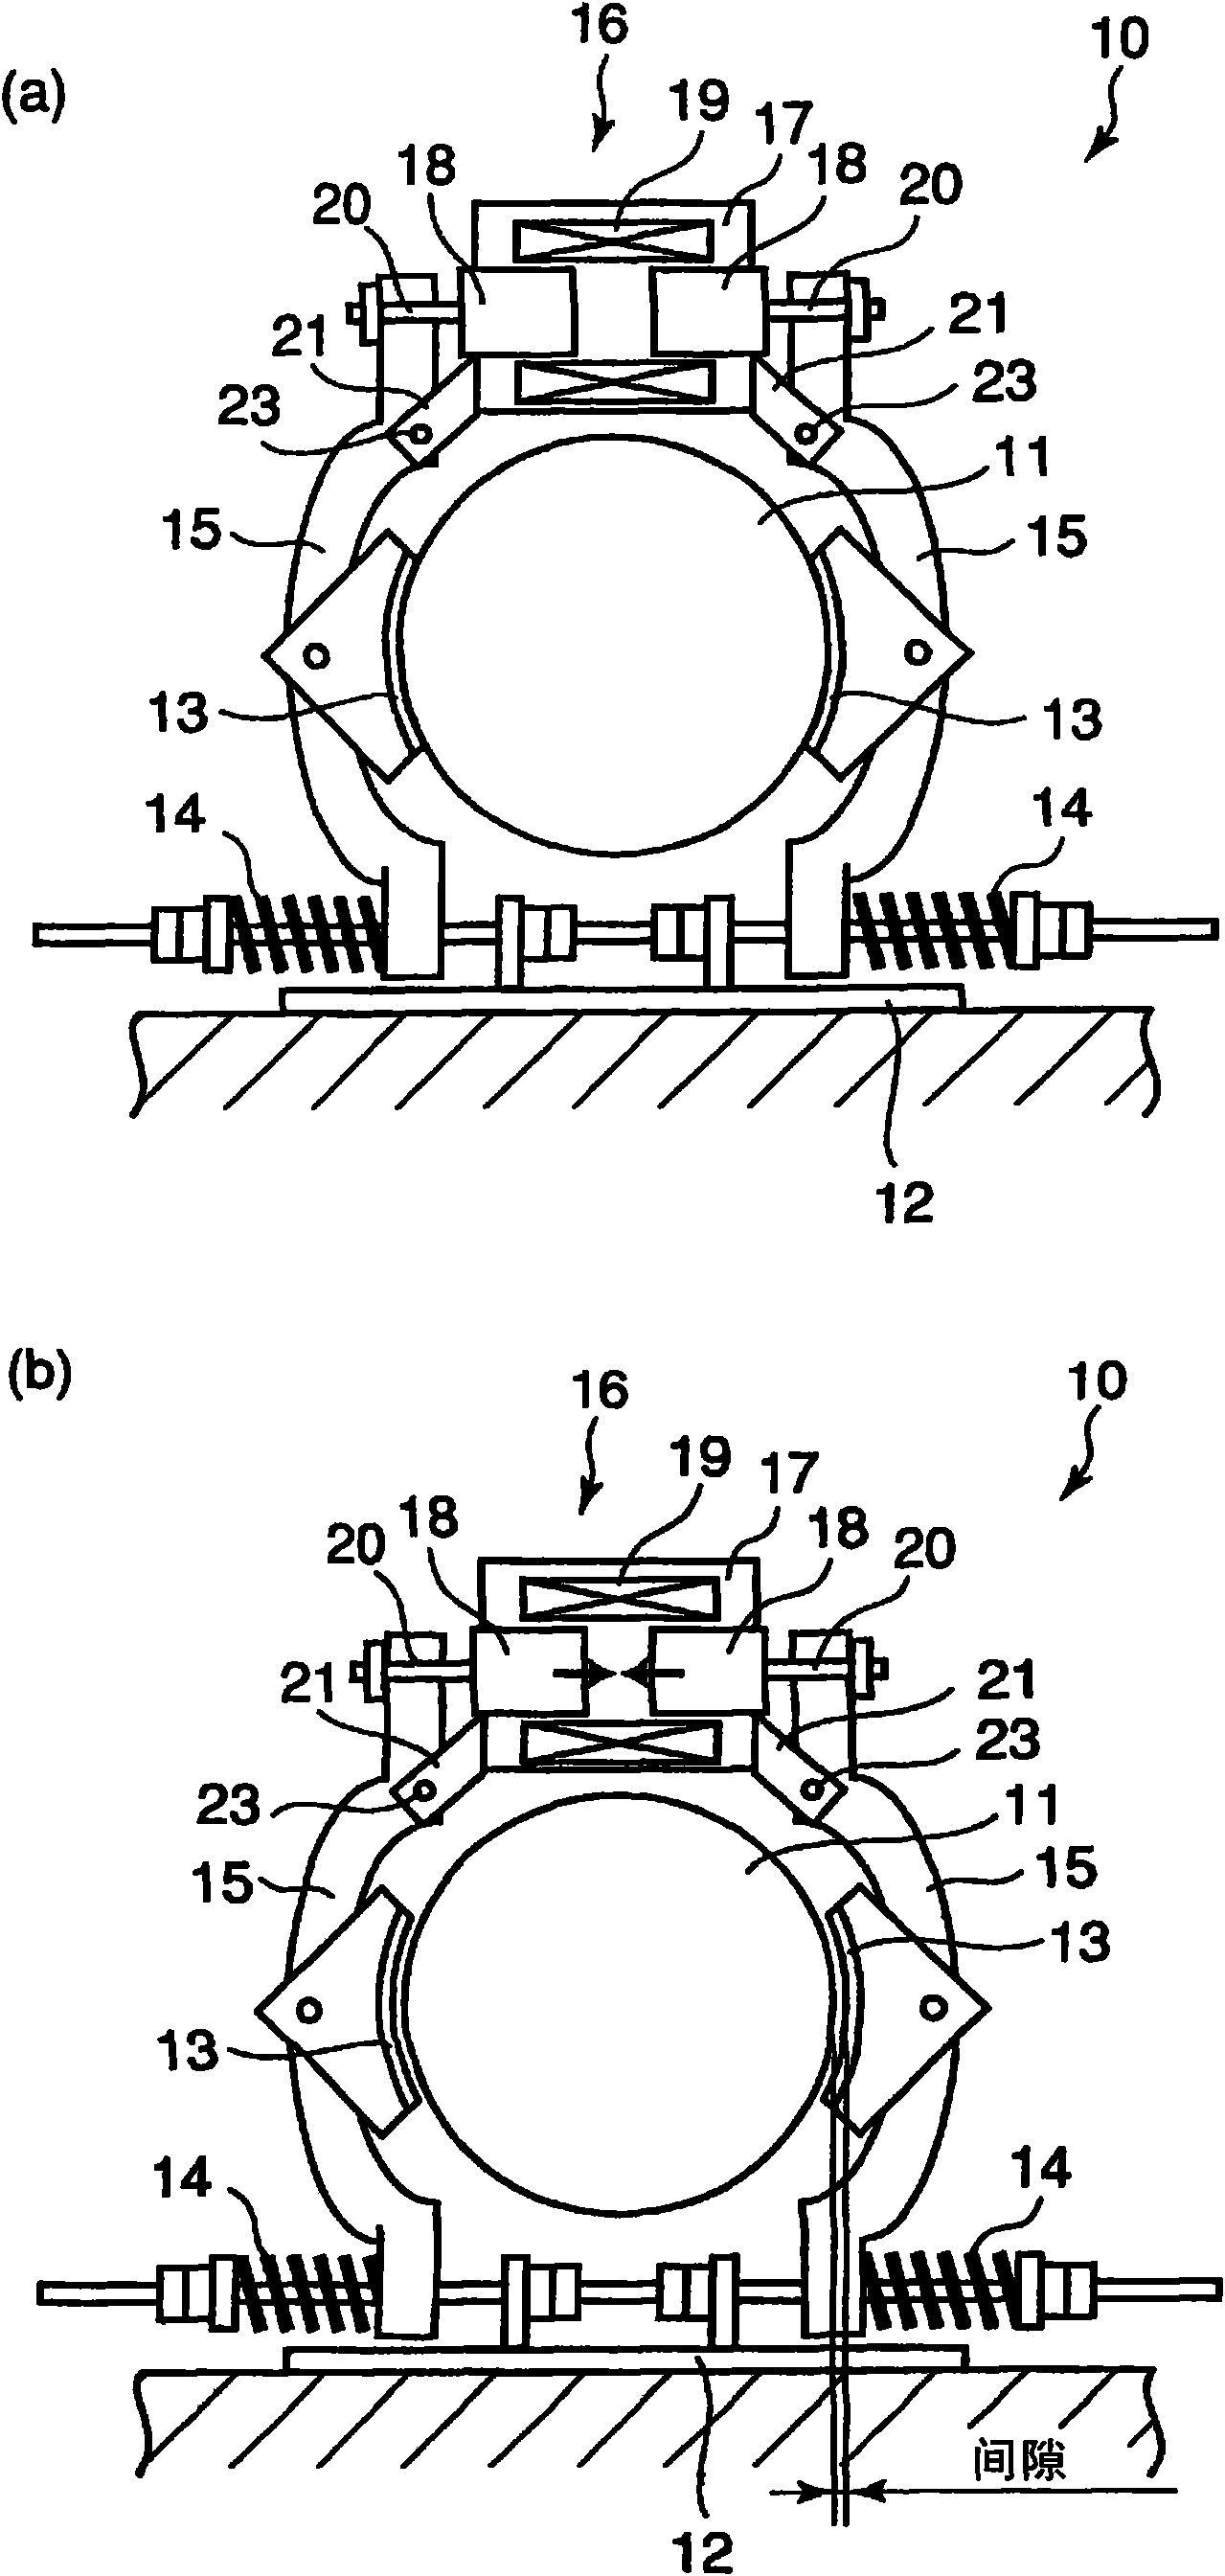 System for maintaining brake device of elevator